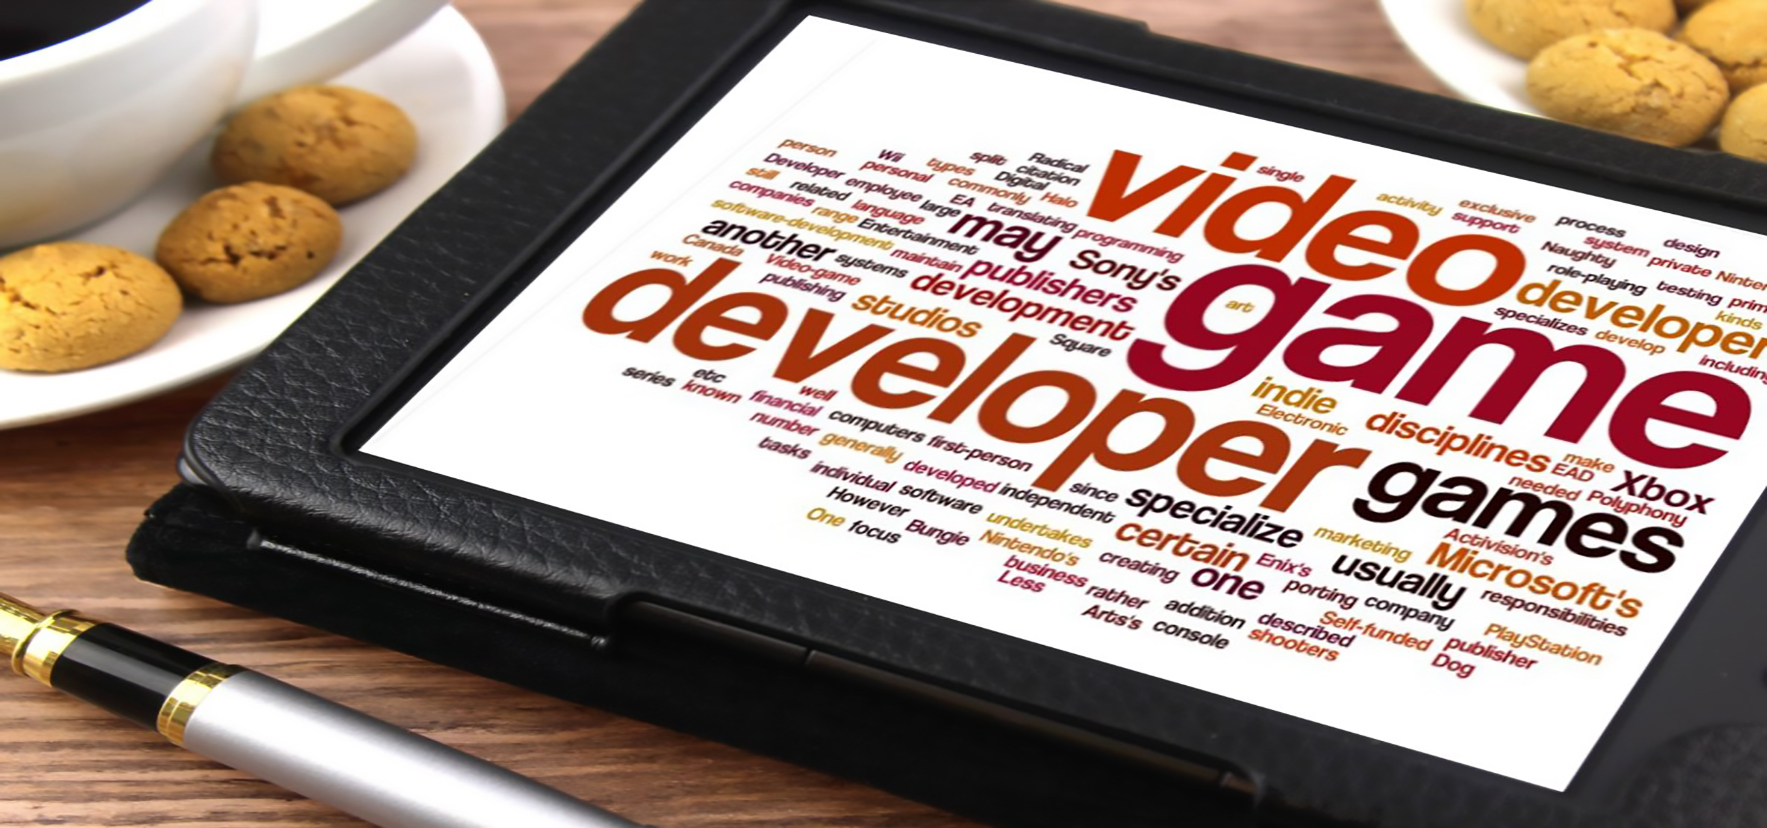 Image: Tablet with a wordcloud with terms related to video games: video games, developer, games, Xbox, Microsoft, Sony's, publishers, developments, studios. Links to Student Competition blog.